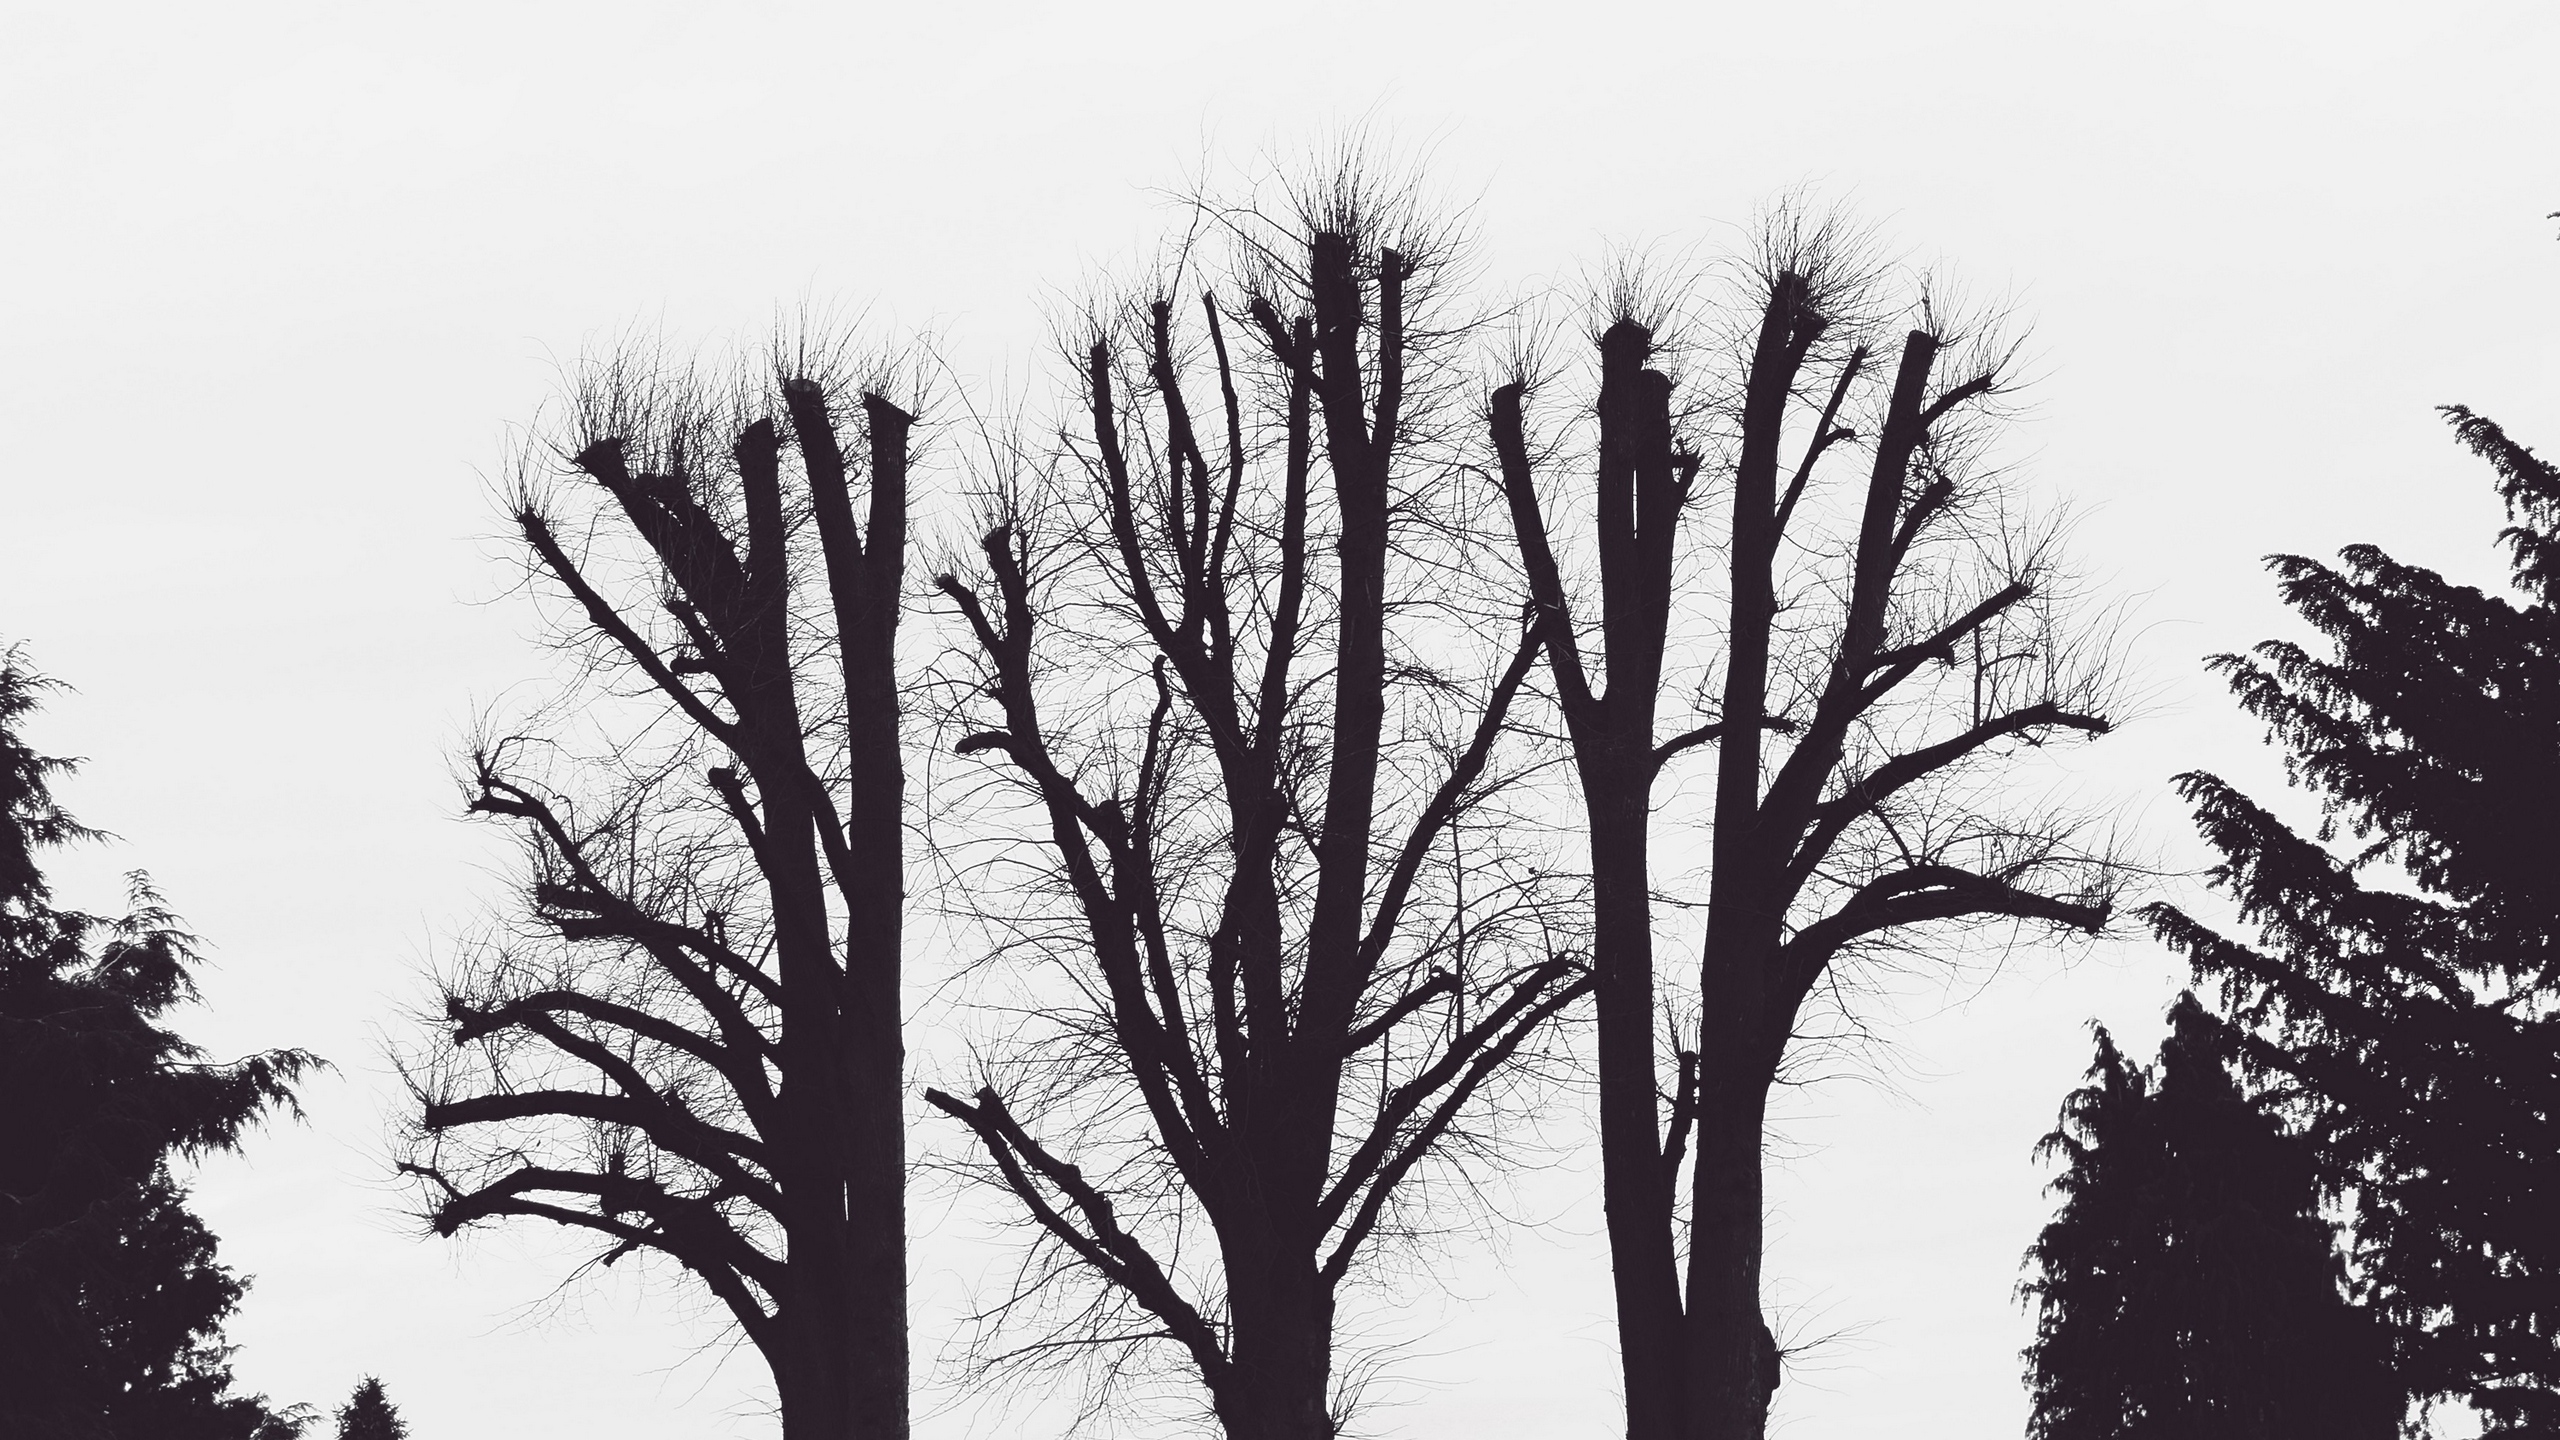 Download wallpaper 2560x1440 trees, branches, aesthetic, bw